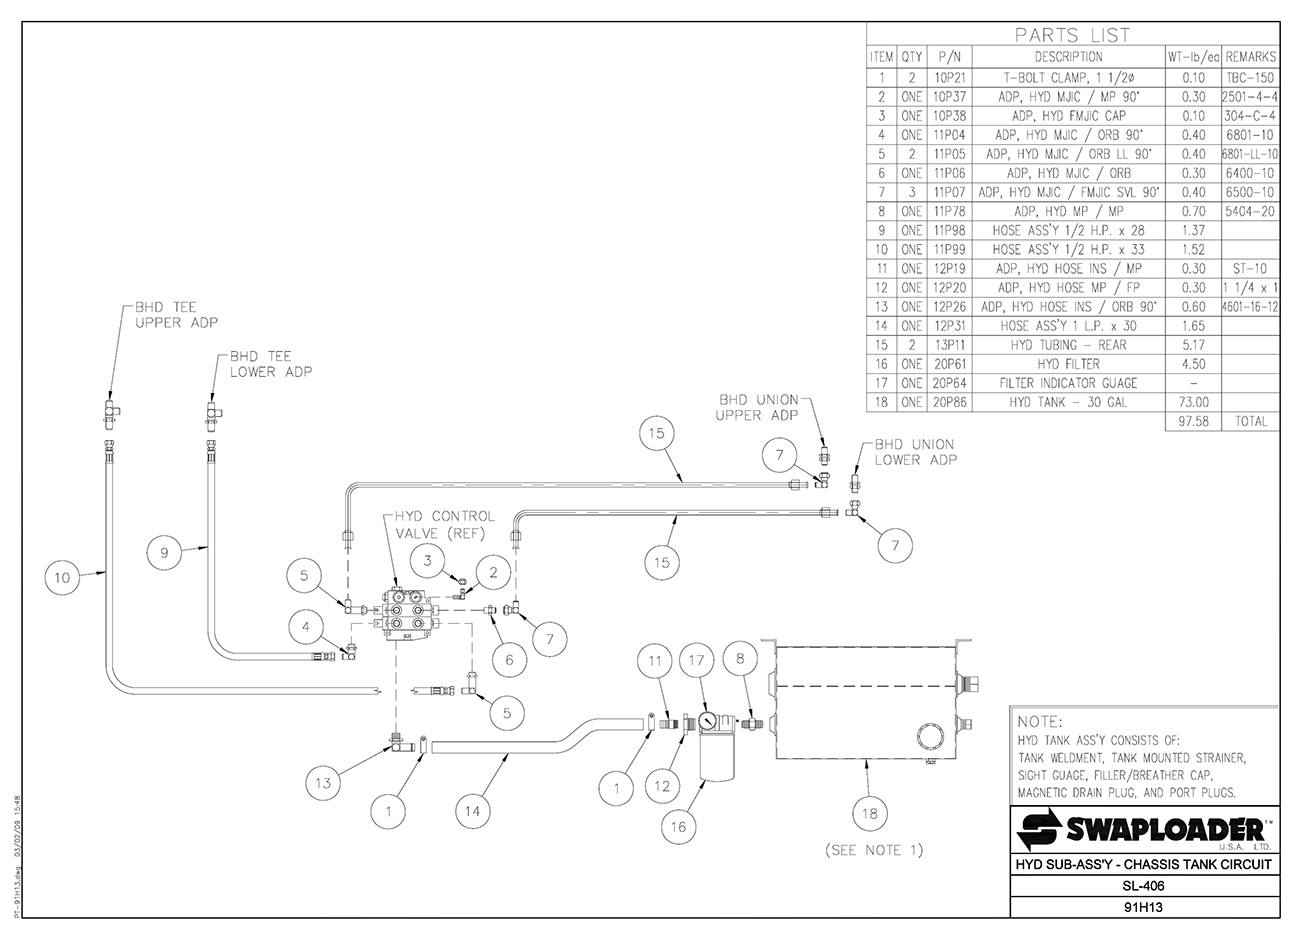 Sl-406 Hydraulic Sub-Assembly Chassis Tank Circuit Diagram